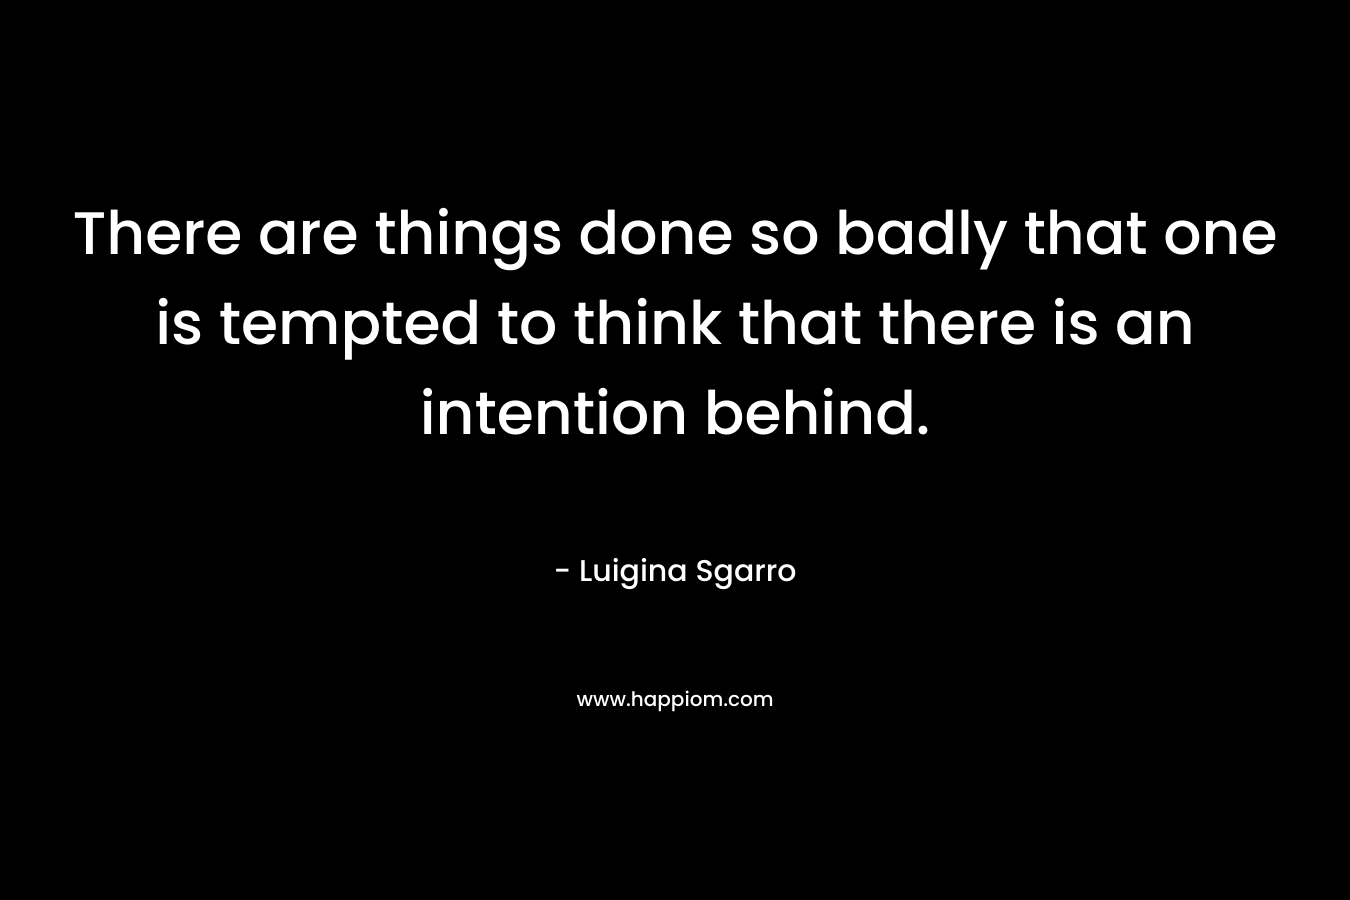 There are things done so badly that one is tempted to think that there is an intention behind. – Luigina Sgarro